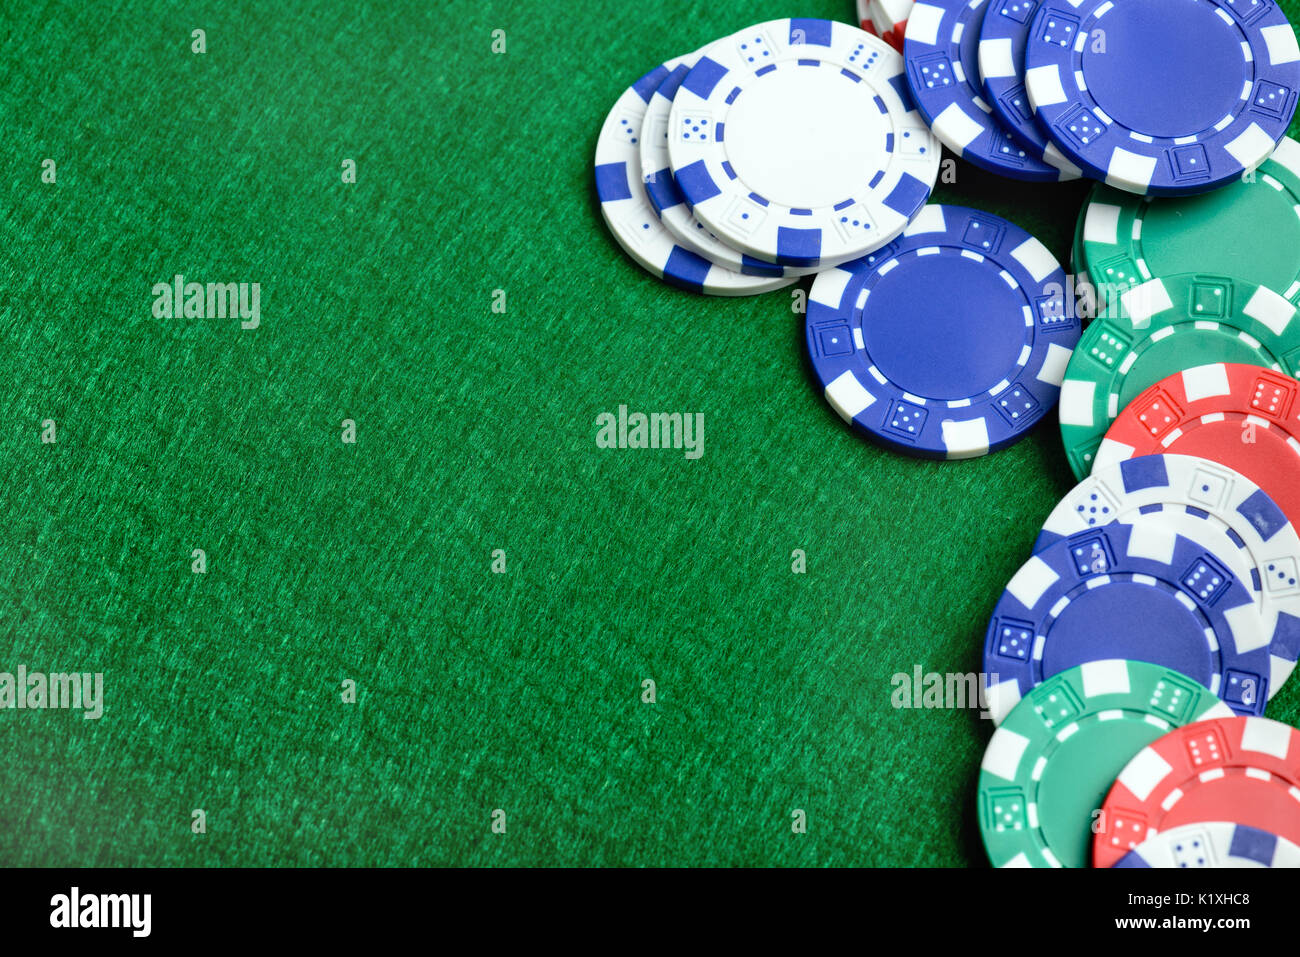 Casino background and chips, poker chips on a green table. Poker game concept Stock Photo